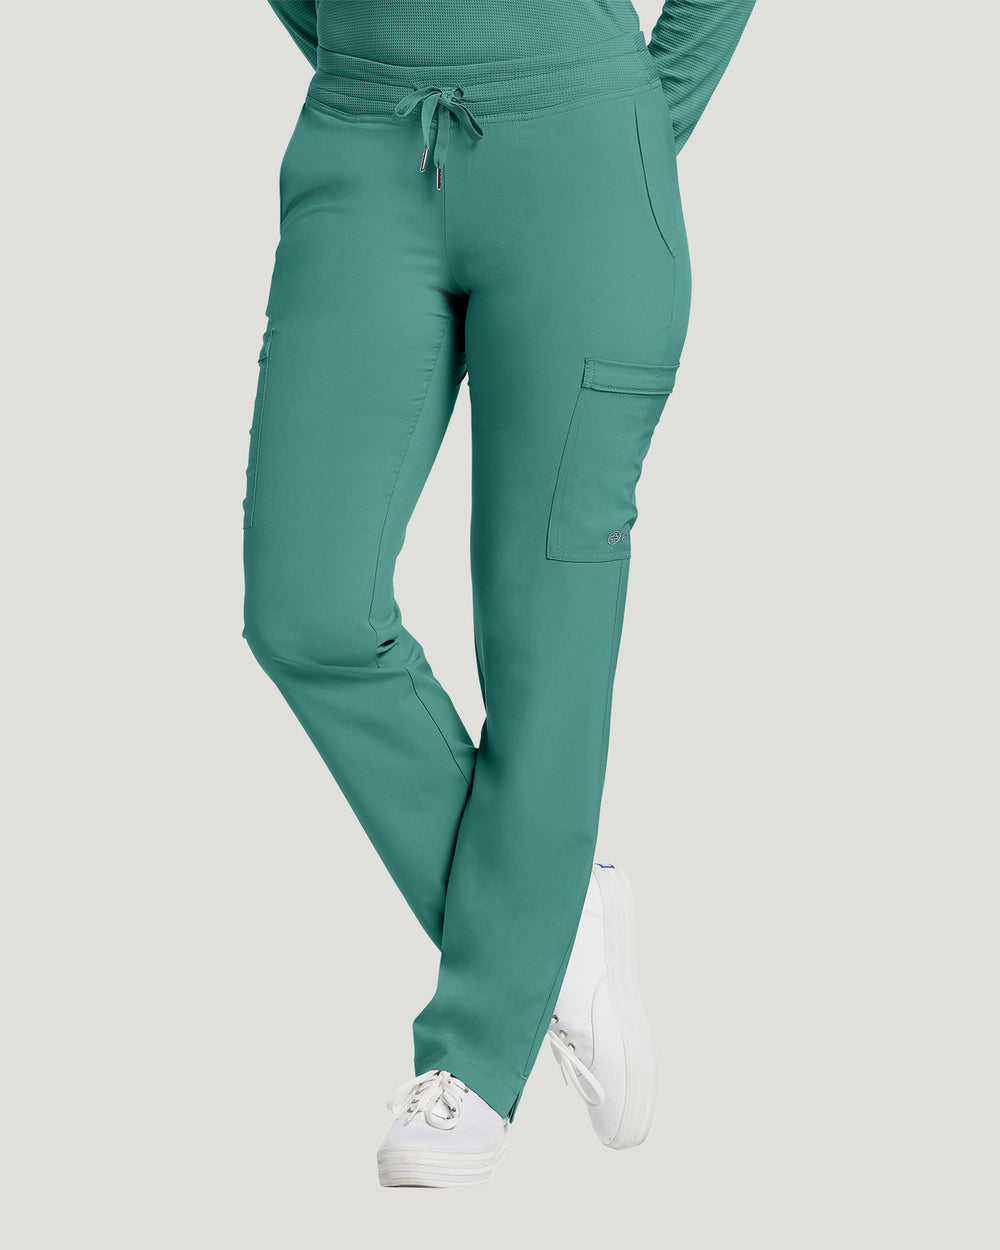 White Cross Fit Comfortable Cargo Pants